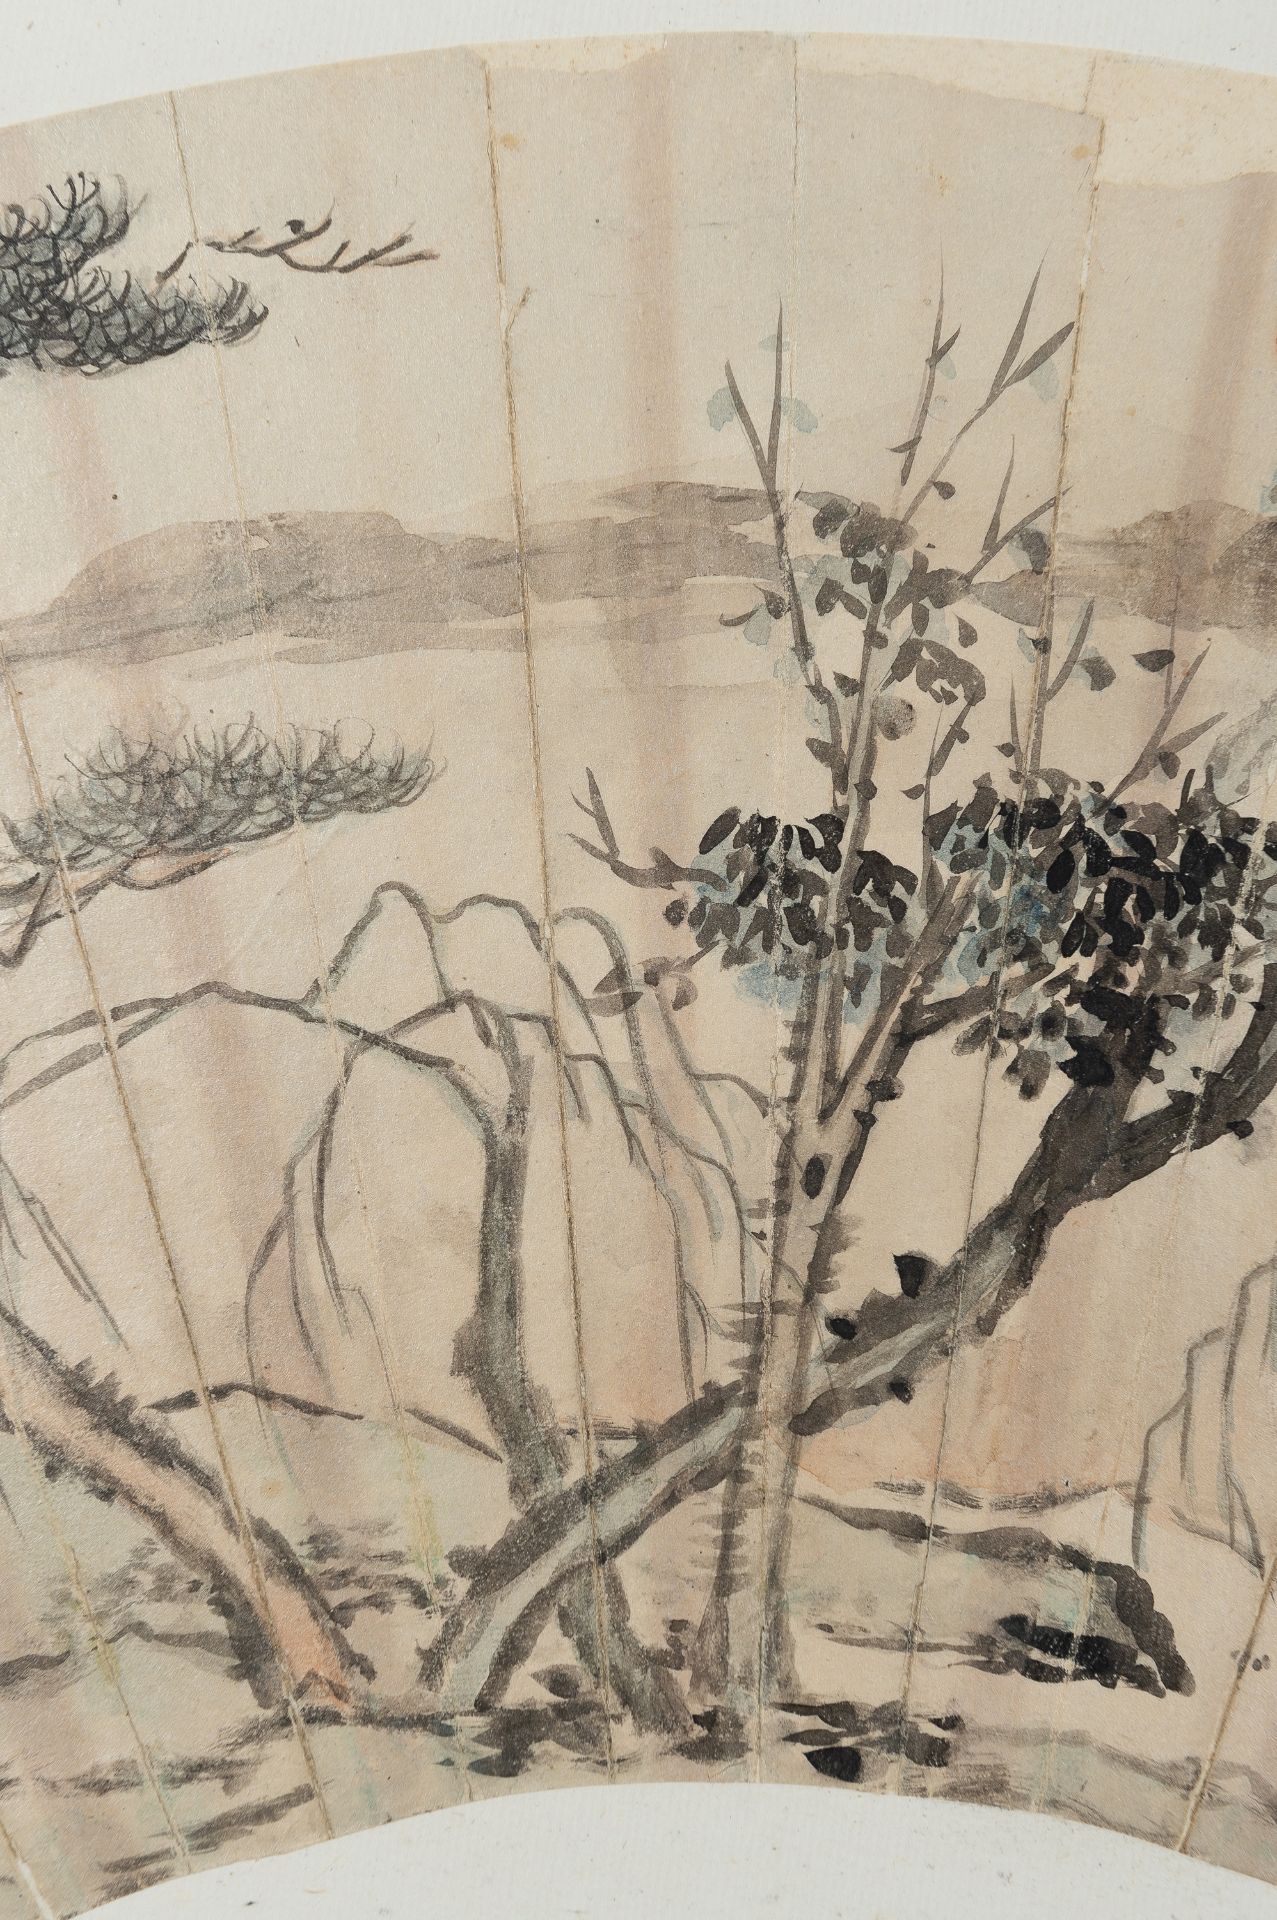 A RIVER LANDSCAPE WITH TREES BY LIU ZHAOWEN - Image 15 of 20